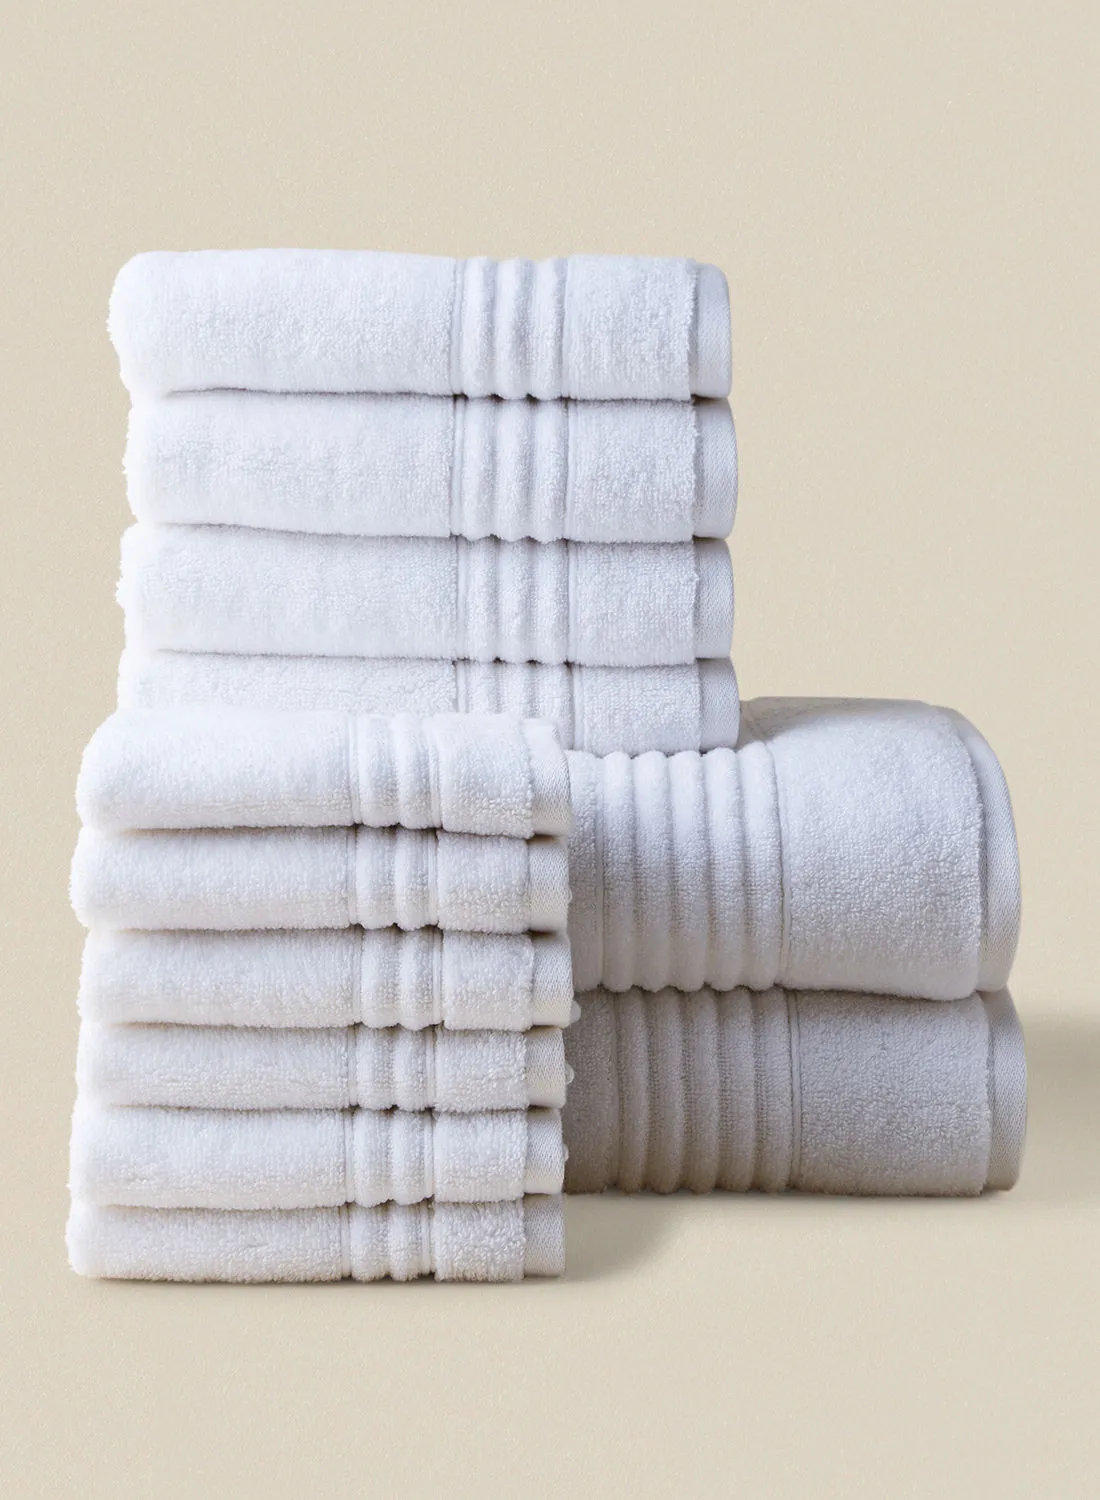 noon east 12 Piece Bathroom Towel Set - 500 GSM 100% Cotton - 4 Hand Towel - 6 Face Towel - 2 Bath Towel - White Color - Highly Absorbent - Fast Dry